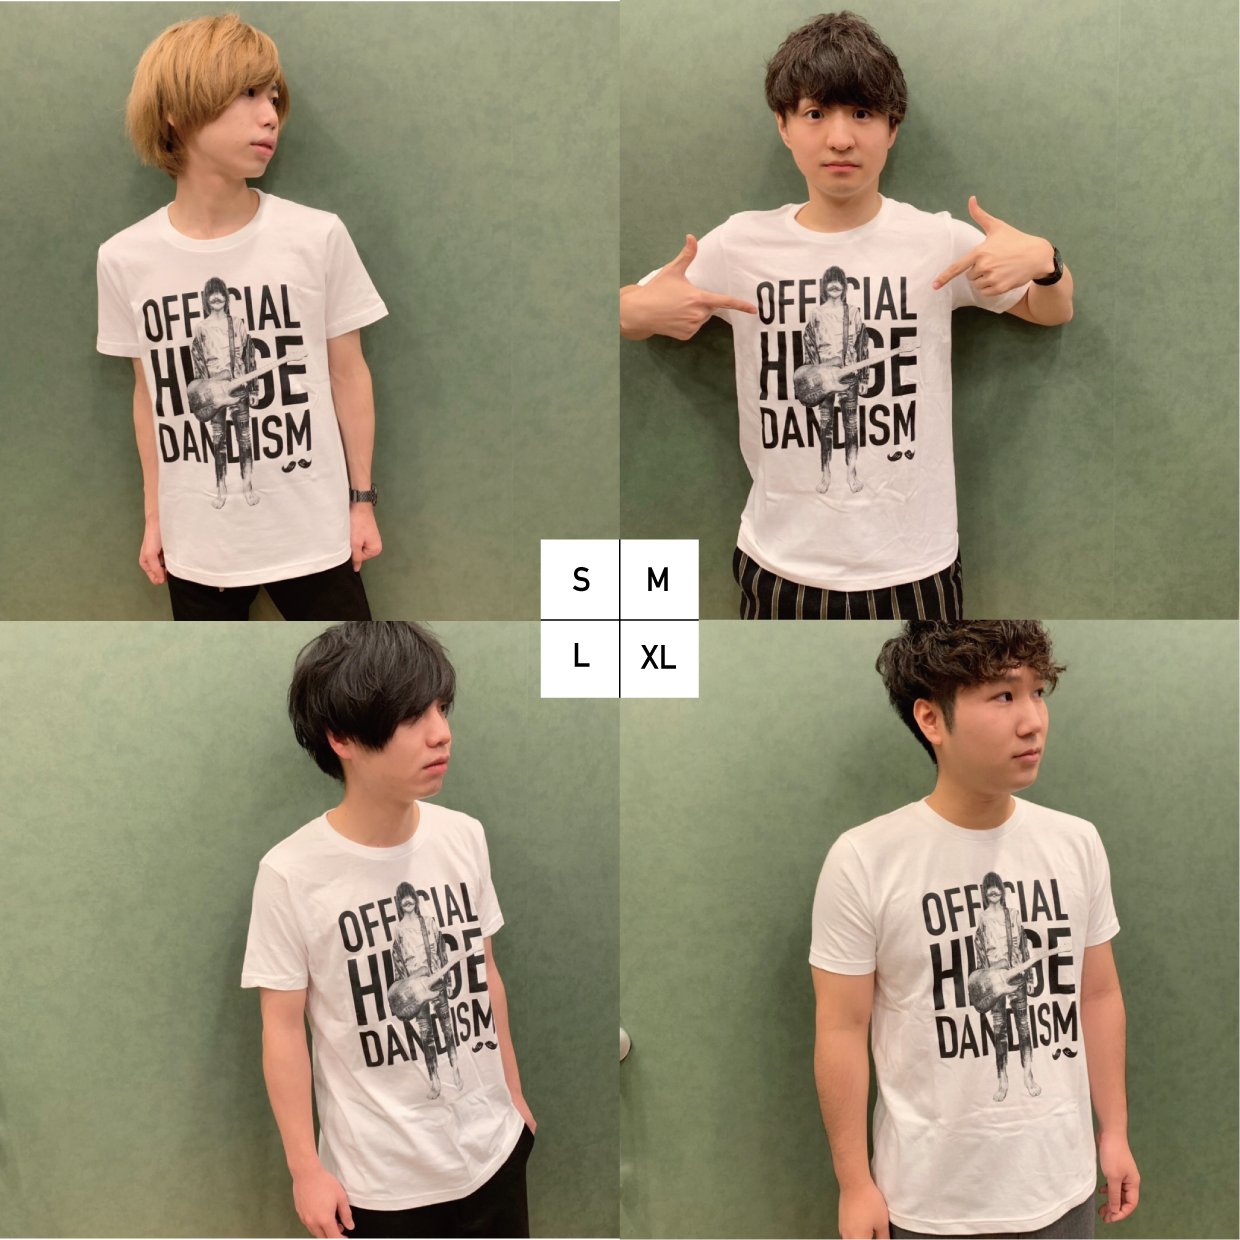 Official髭男dism 2019 Tシャツ